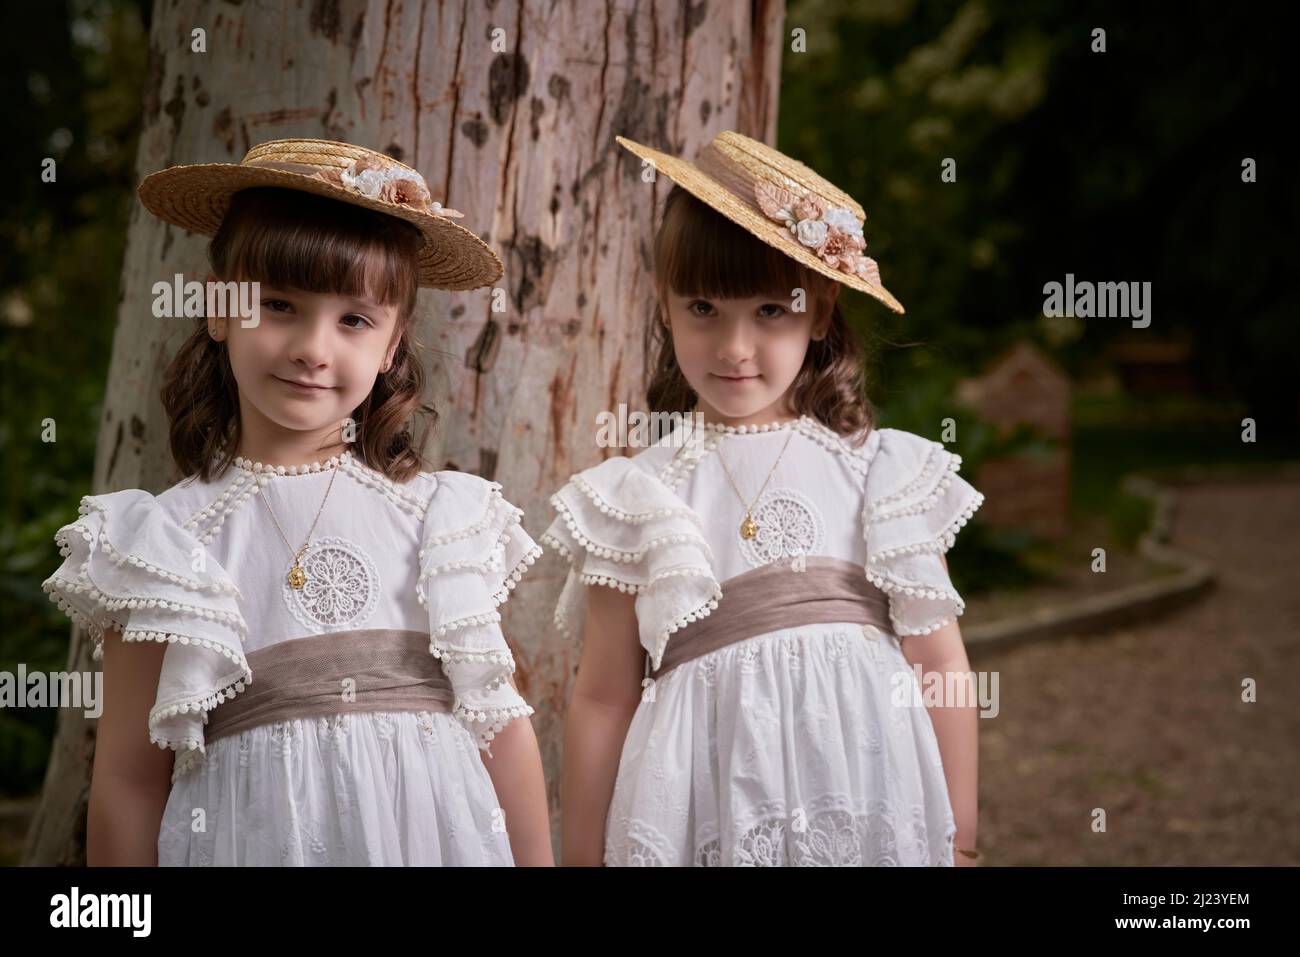 Communion twin little sisters next to a big tree in a park Stock Photo